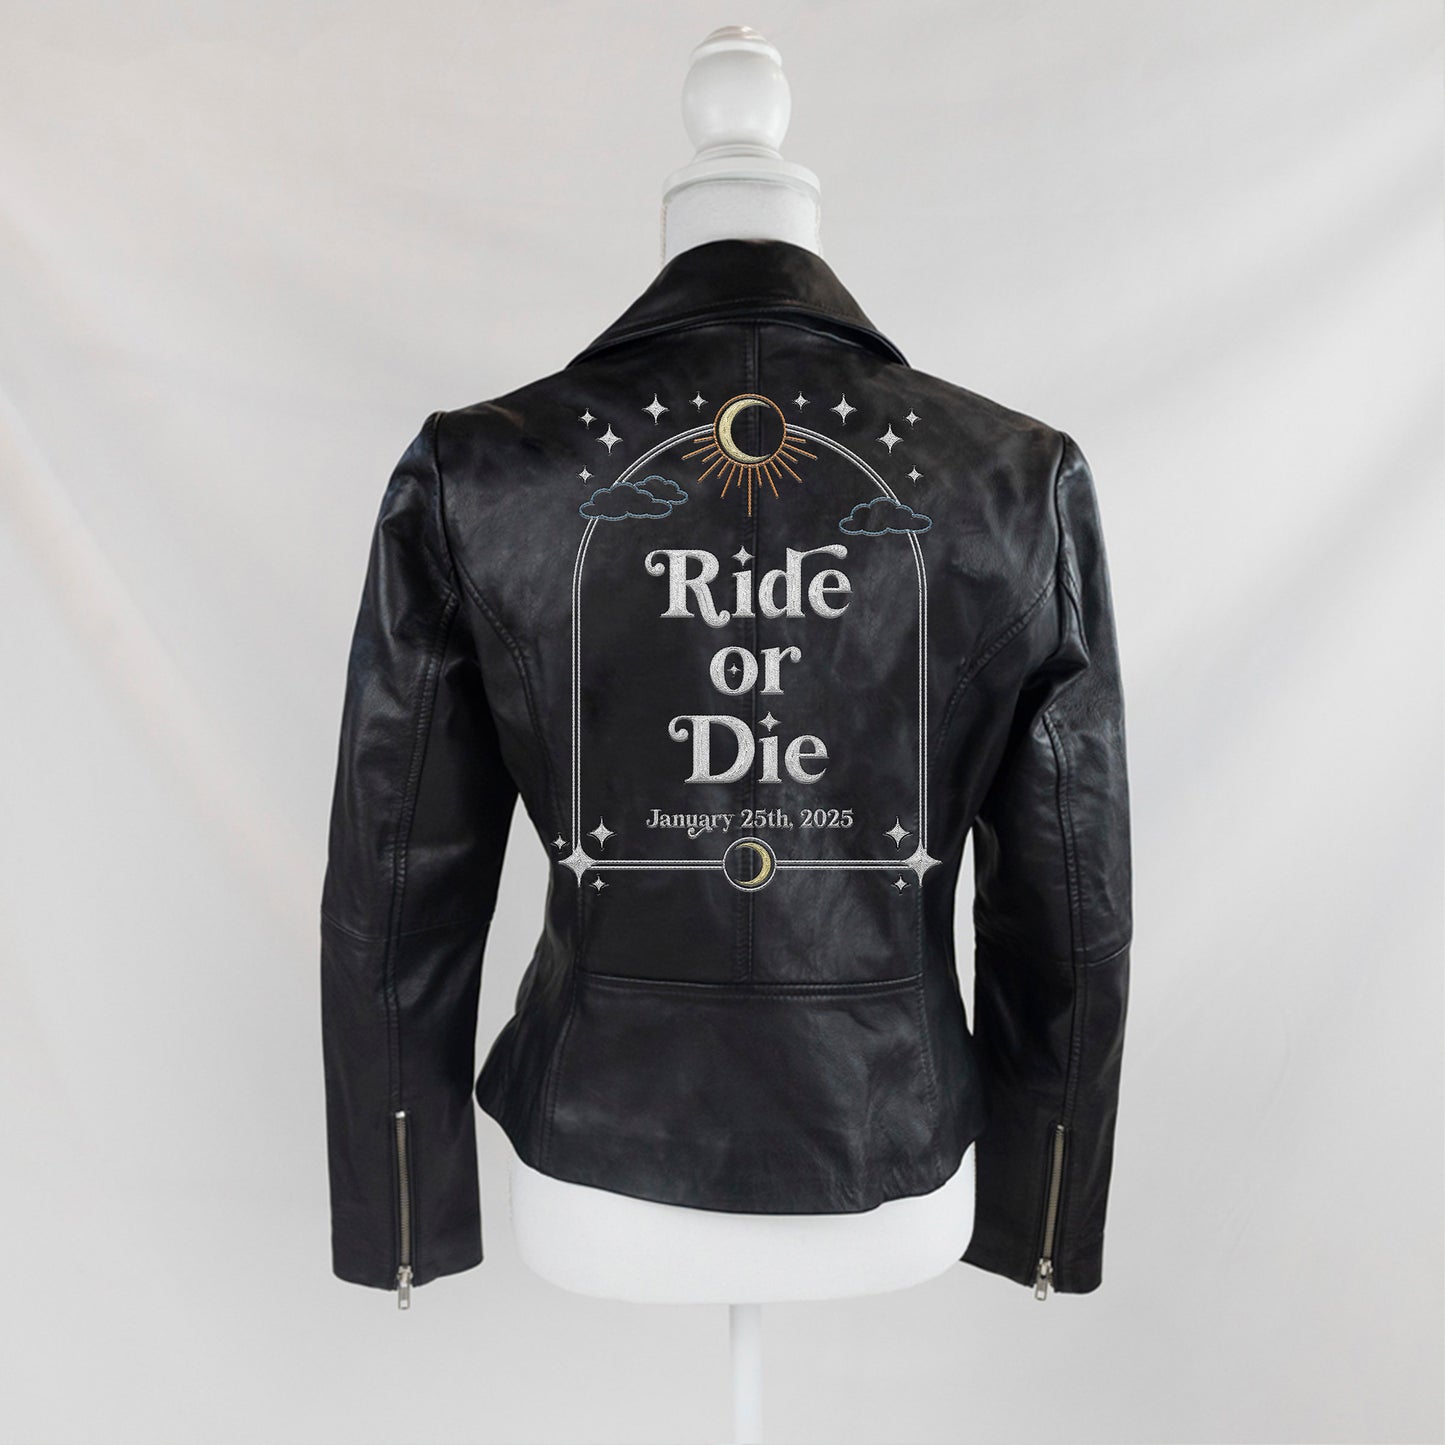 Mrs. Leather Jacket Gifts